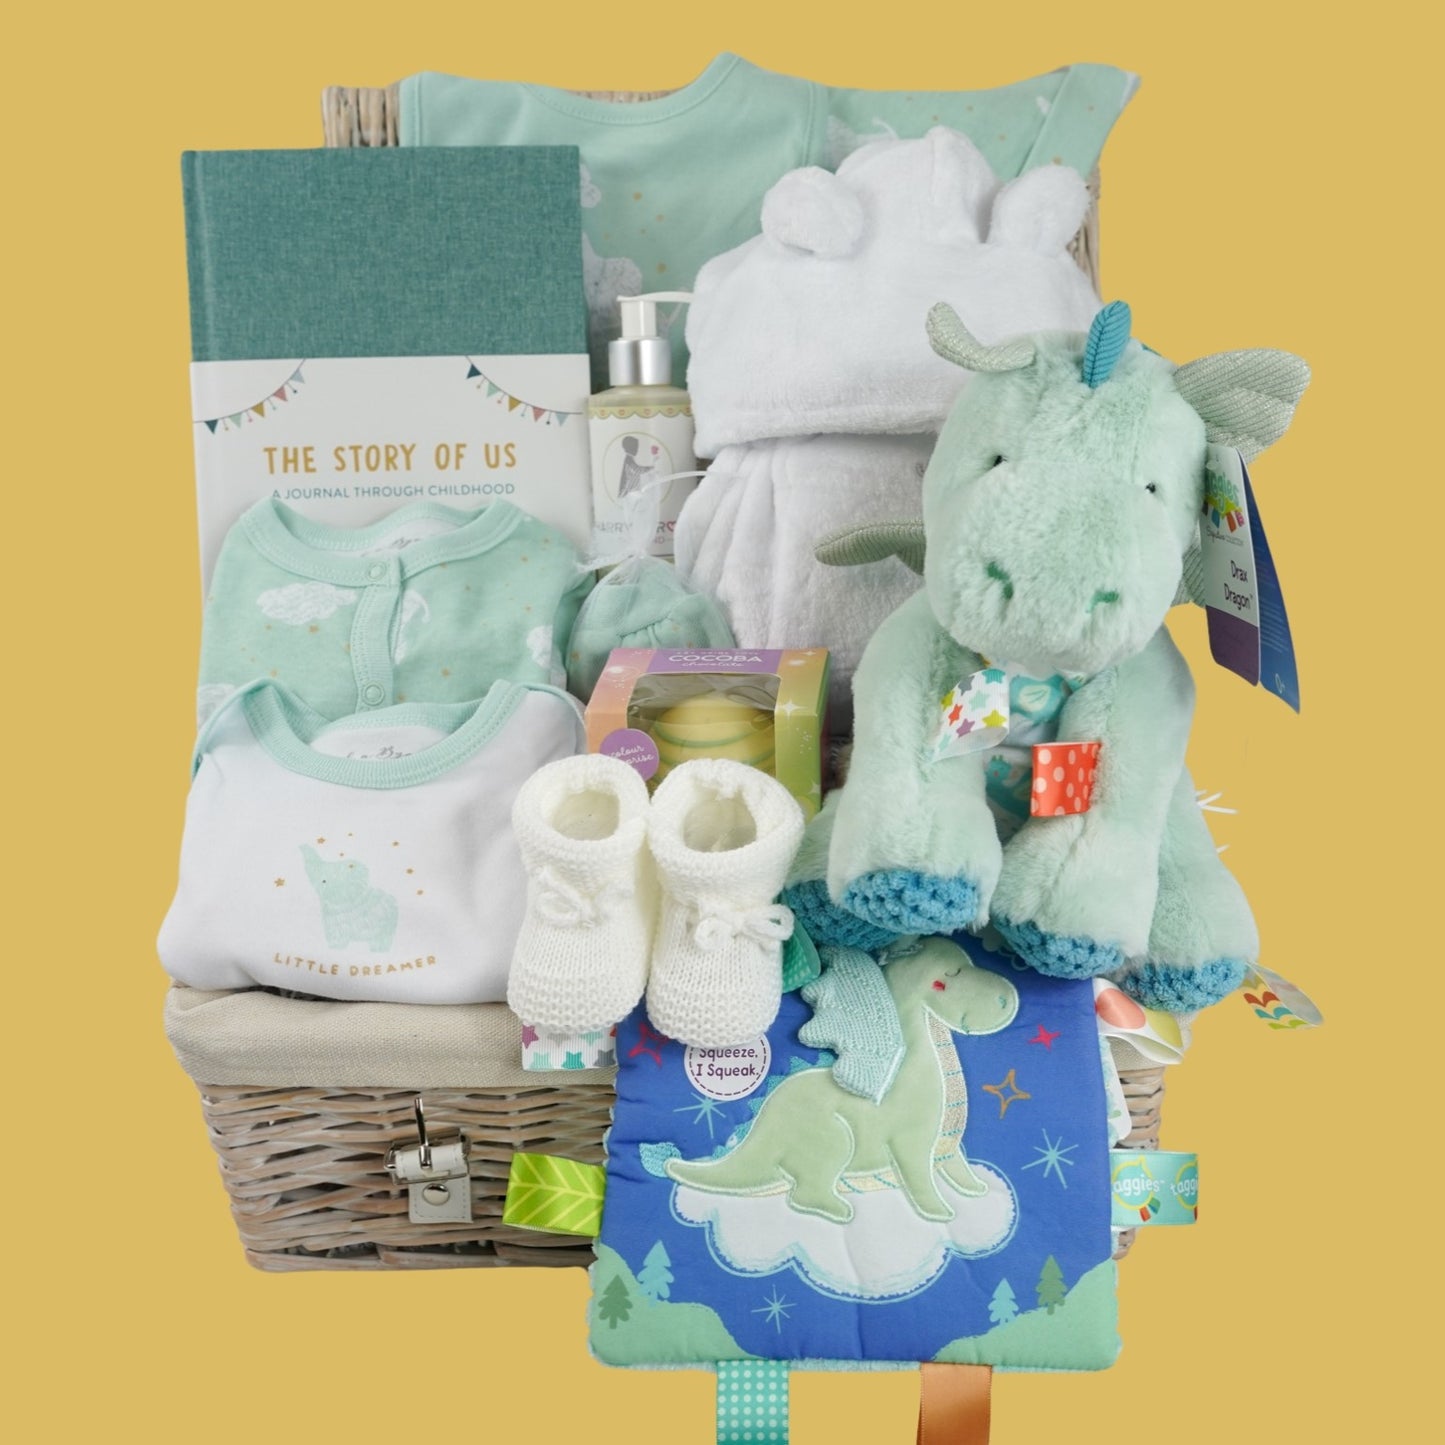 Baby Hamper Baskets, Infant Gift, Dragon Taggie Toy And Crinkle Toy, Baby Layette, Corporate Maternity Gift